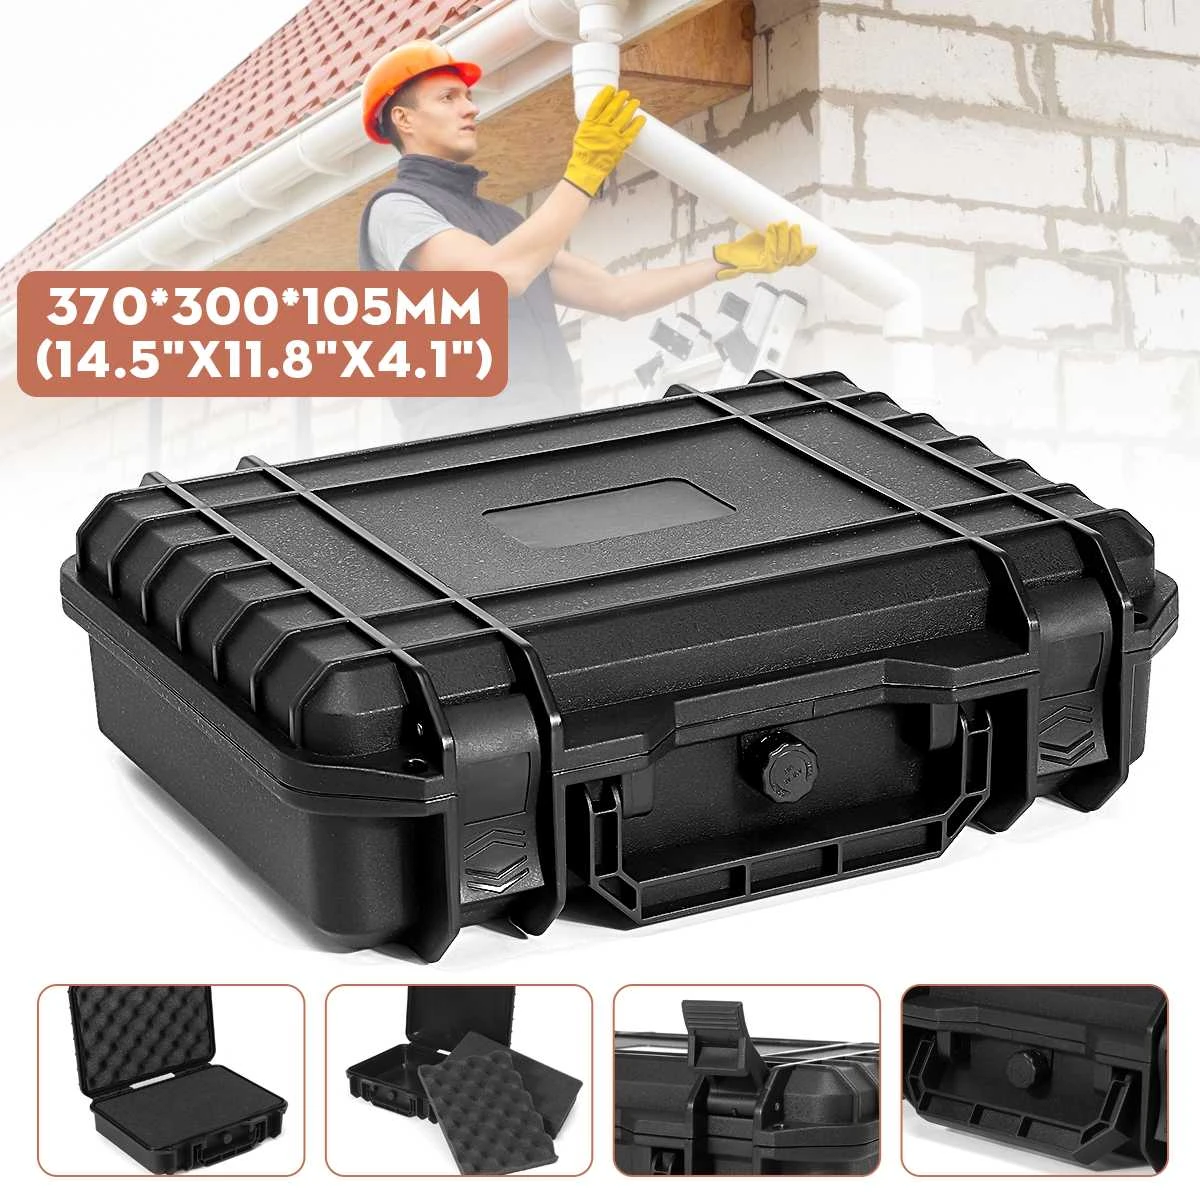 wooden tool chest Hard Carry Tool Case Sealed Tool Box Safety Camera Photography Storage Box Suitcase With Sponge Equipment Suitcase ABS Plastic roller cabinet